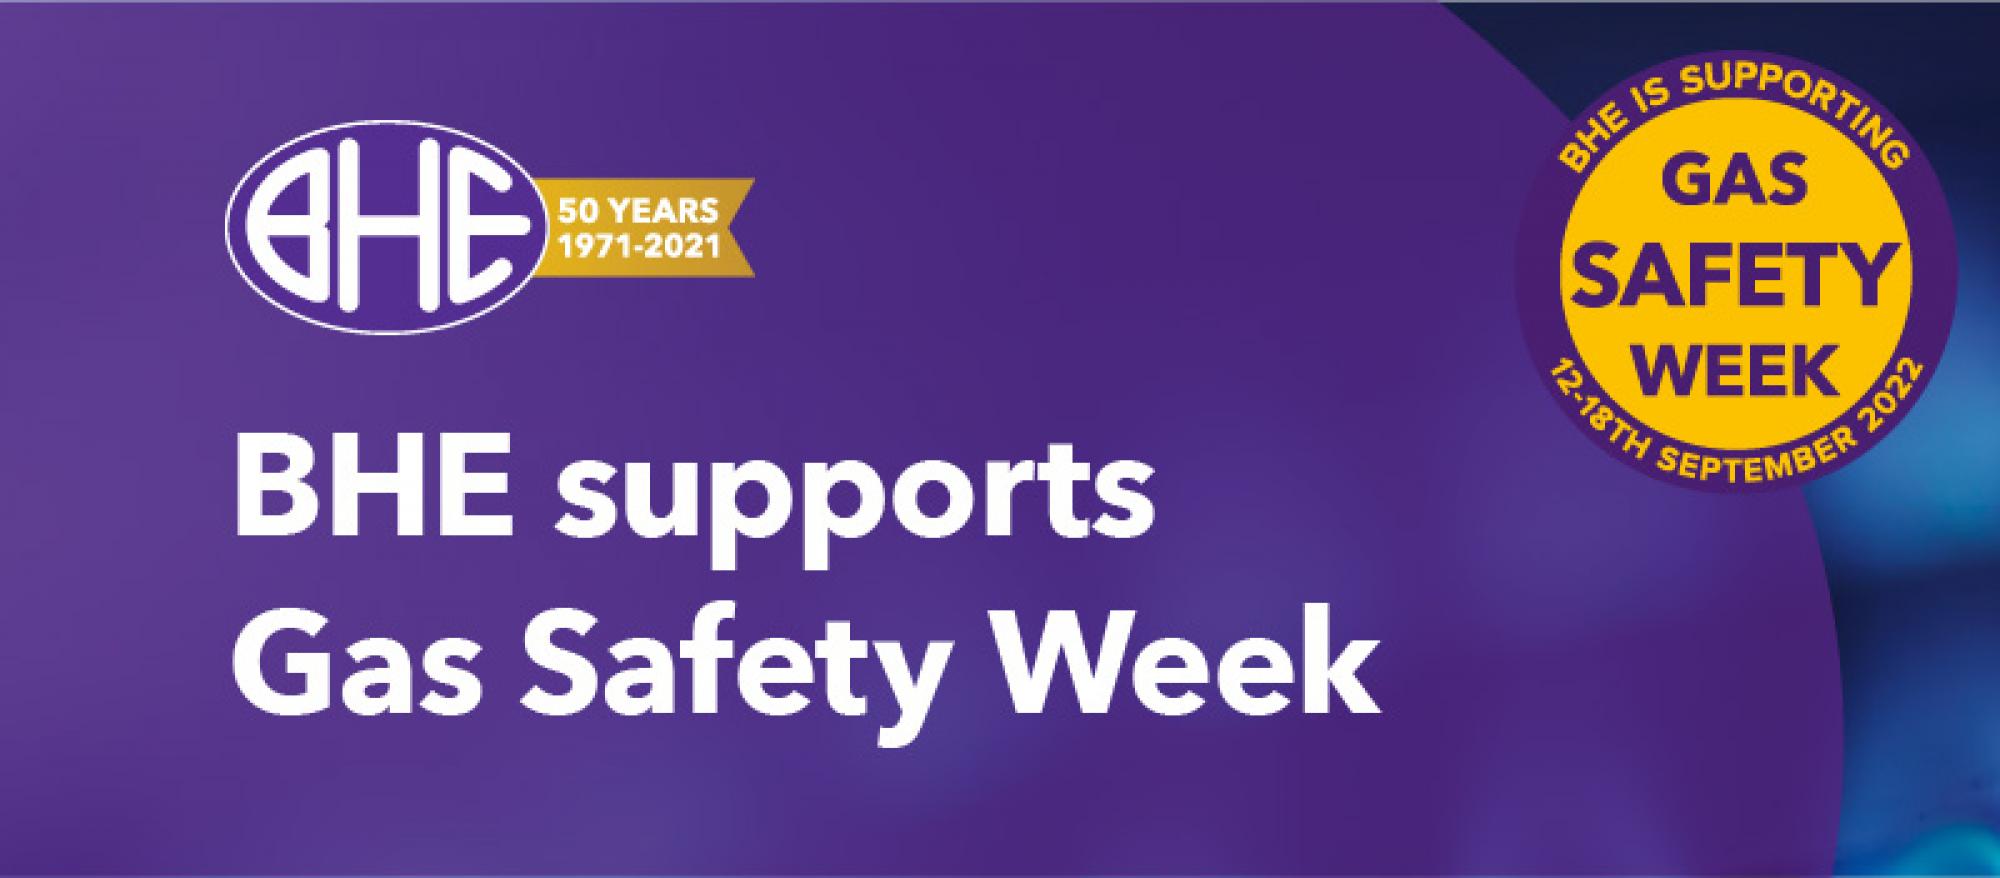 Bolton's BHE supports Gas Safety Week 2022, running from 12-18th September 2022